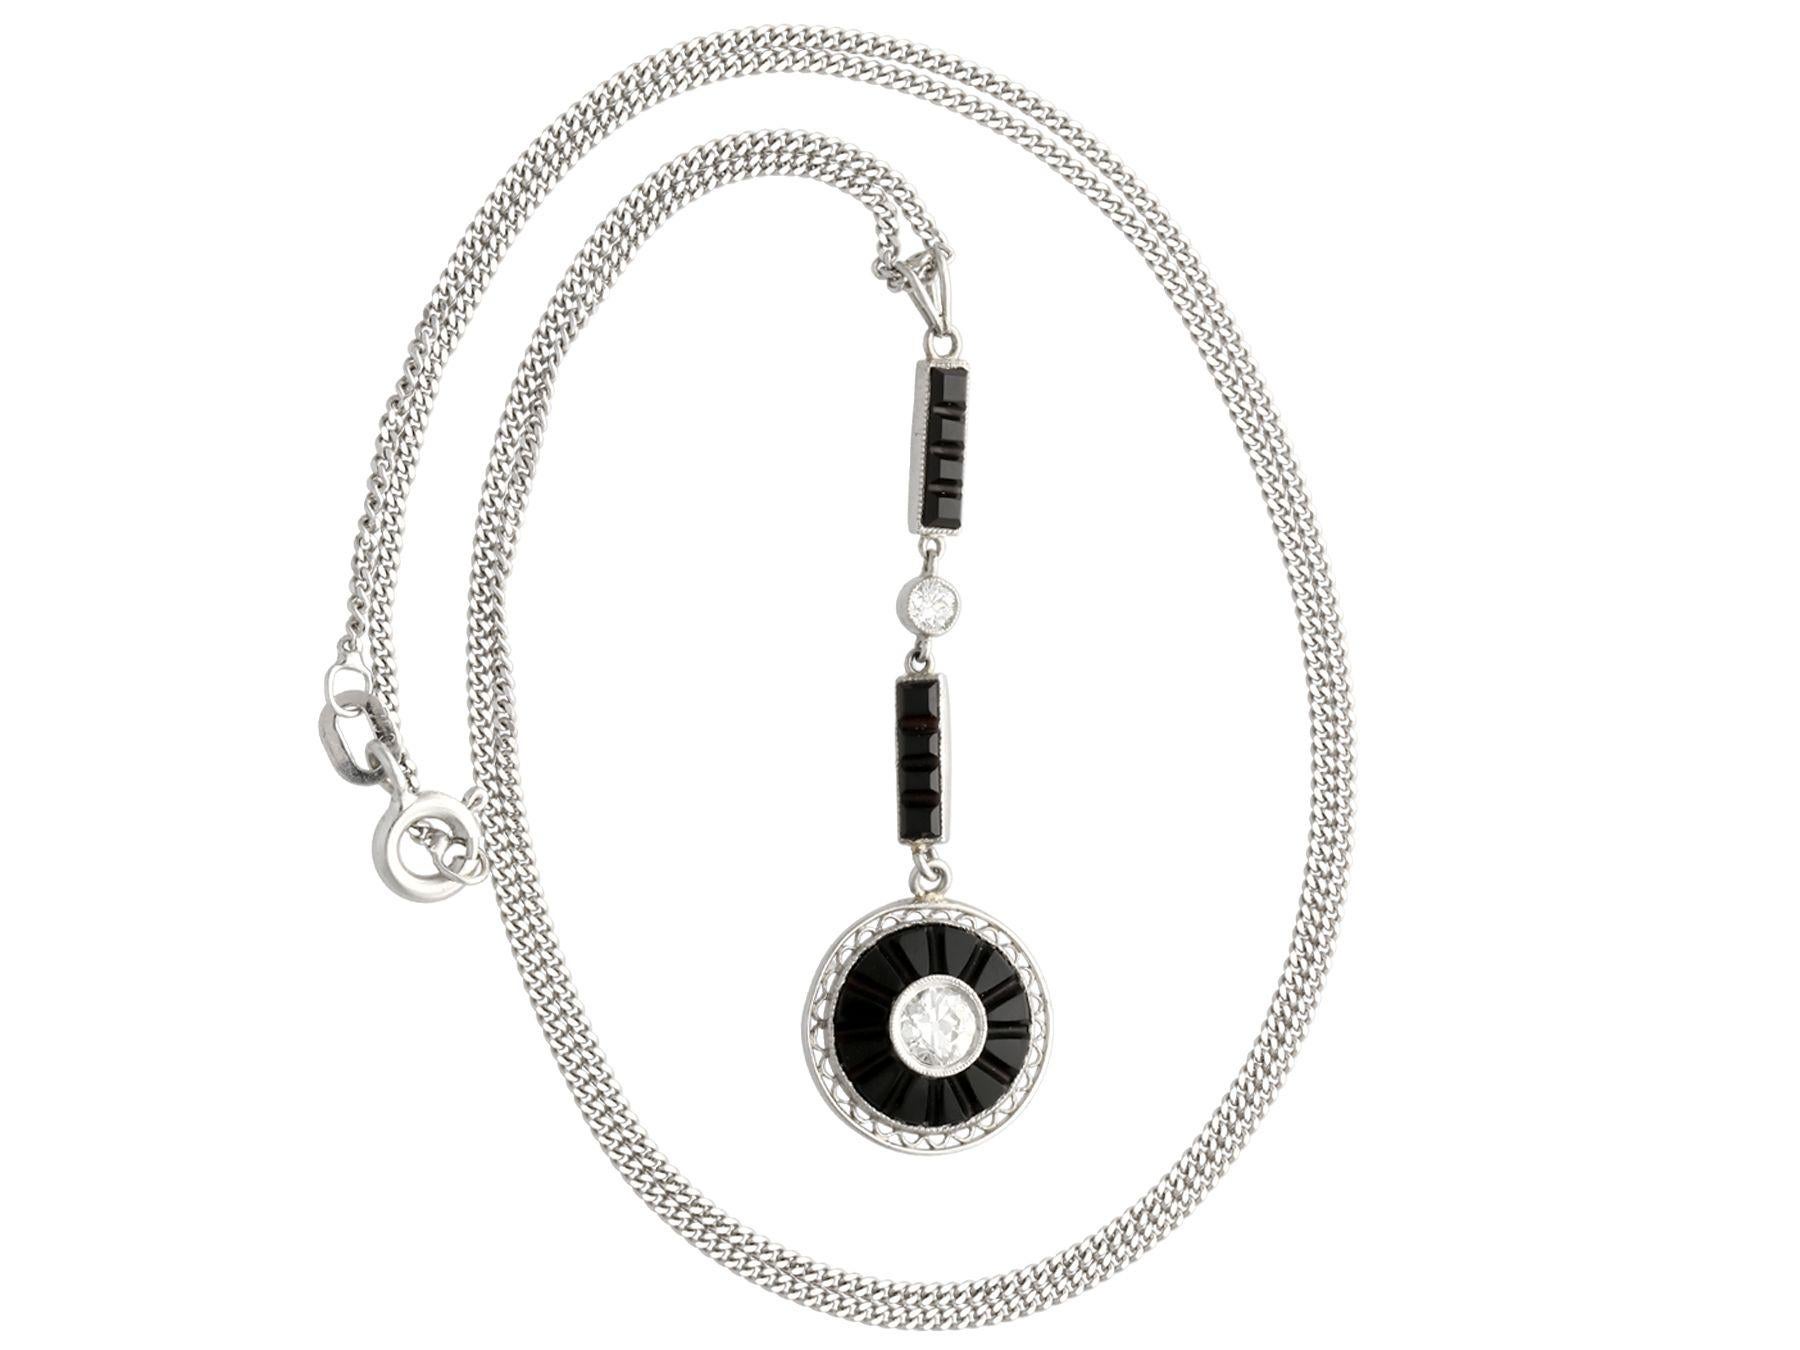 A fine and impressive antique 1.05 Carat onyx and 0.35 Carat diamond, platinum pendant; part of our diverse antique jewelry and estate jewelry collections.

This fine and impressive antique pendant has been crafted in platinum.

The drop style